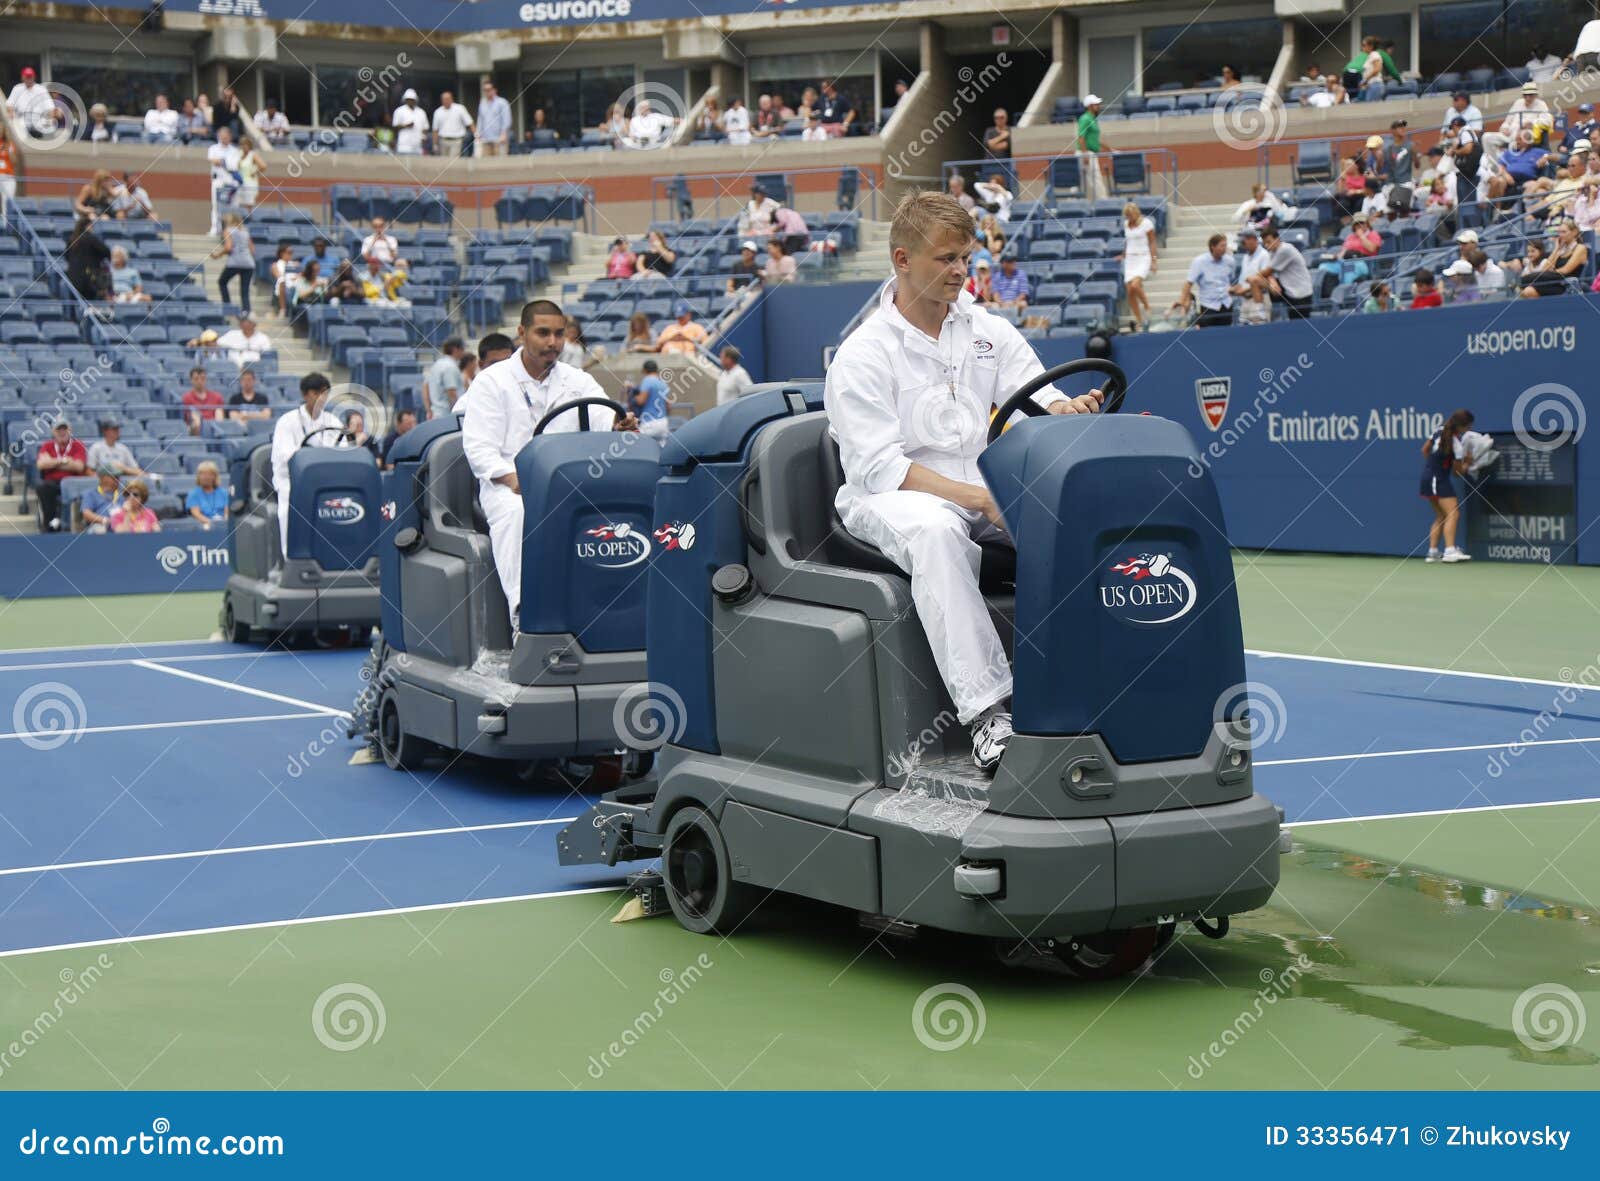 US Open Cleaning Crew Drying Tennis Court after Rain Delay at Arthur Ashe Stadium Editorial Photo